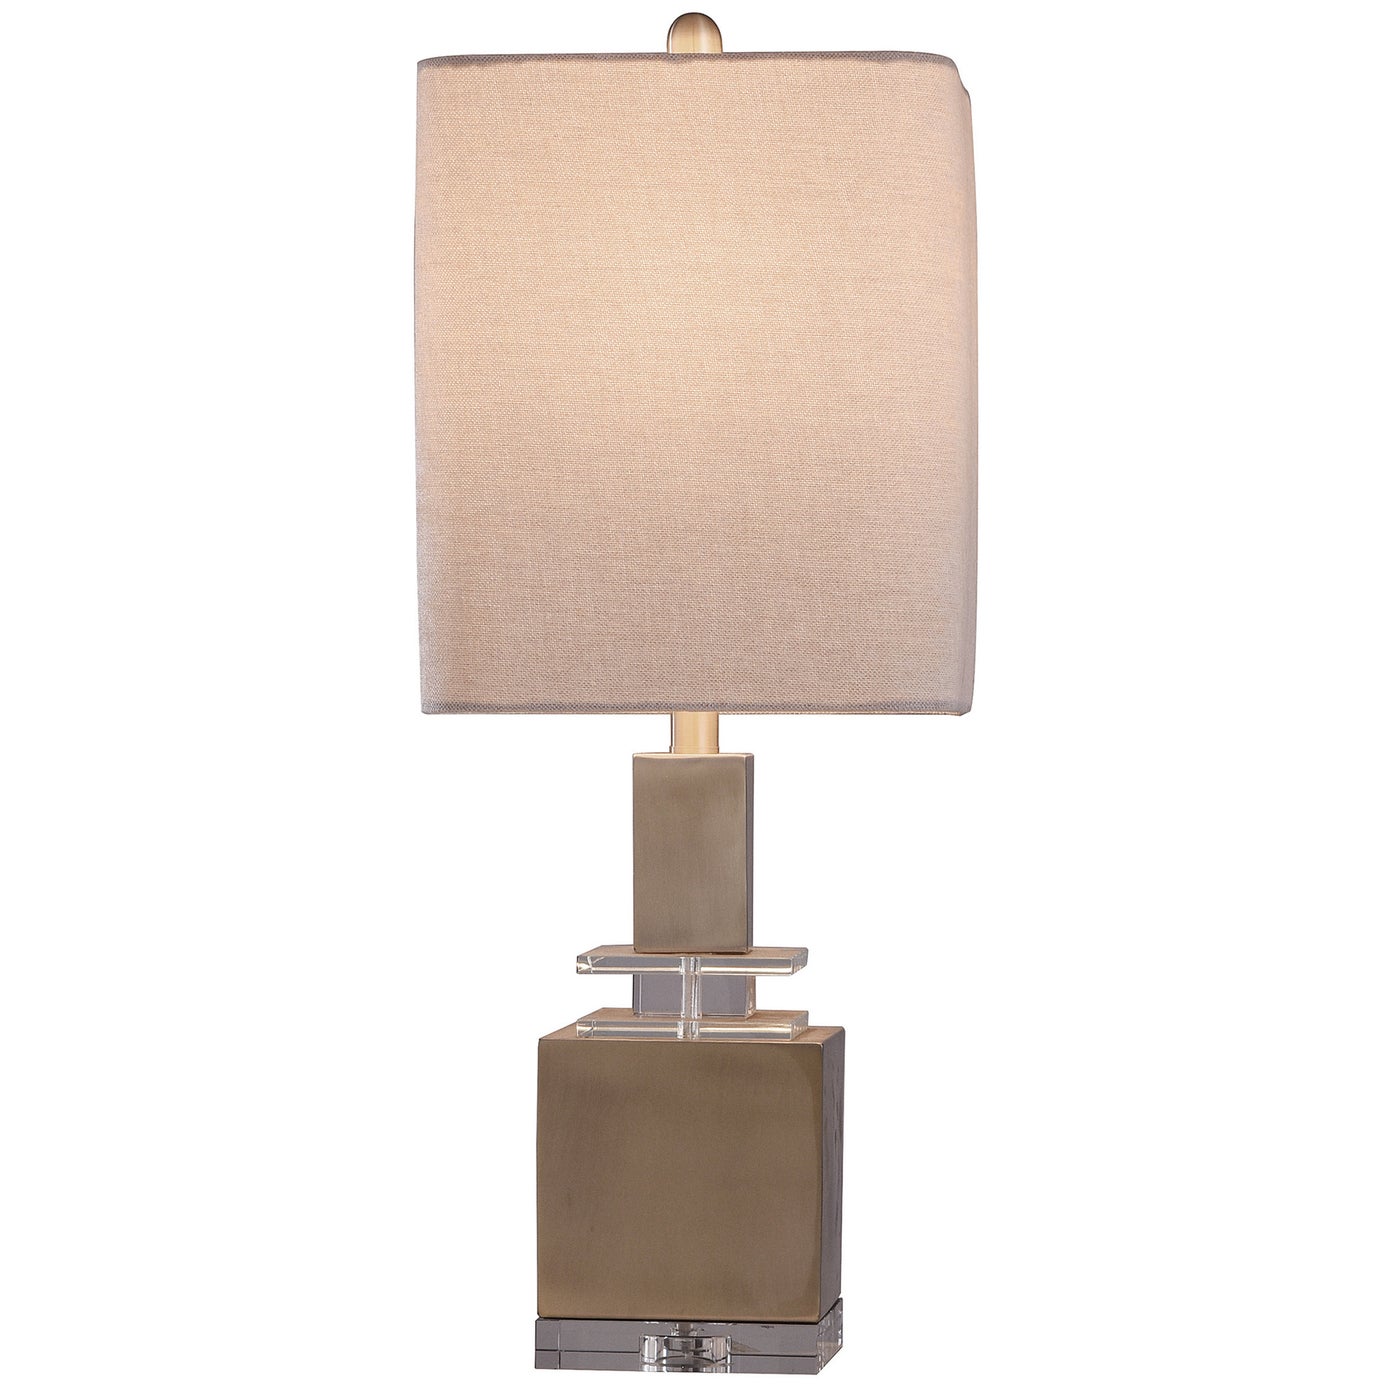 RONDA TABLE LAMP - Brass Finish on Metal Body with Crystal Center